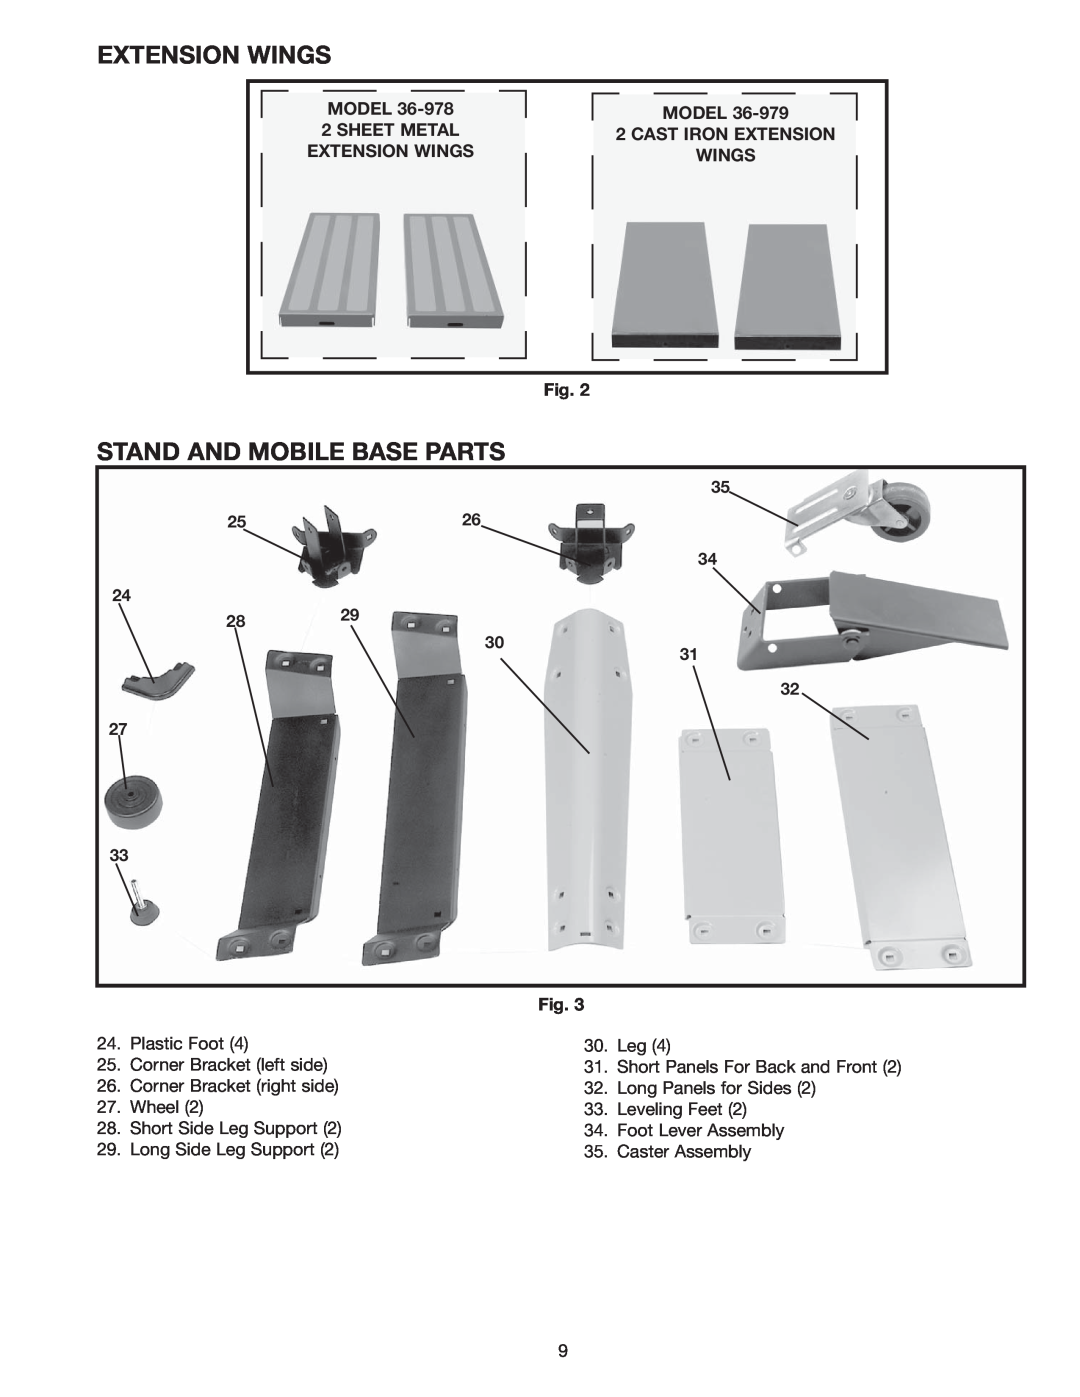 Delta 36-978 instruction manual Extension Wings, Stand And Mobile Base Parts, MODEL 2 SHEET METAL EXTENSION WINGS, 2829 